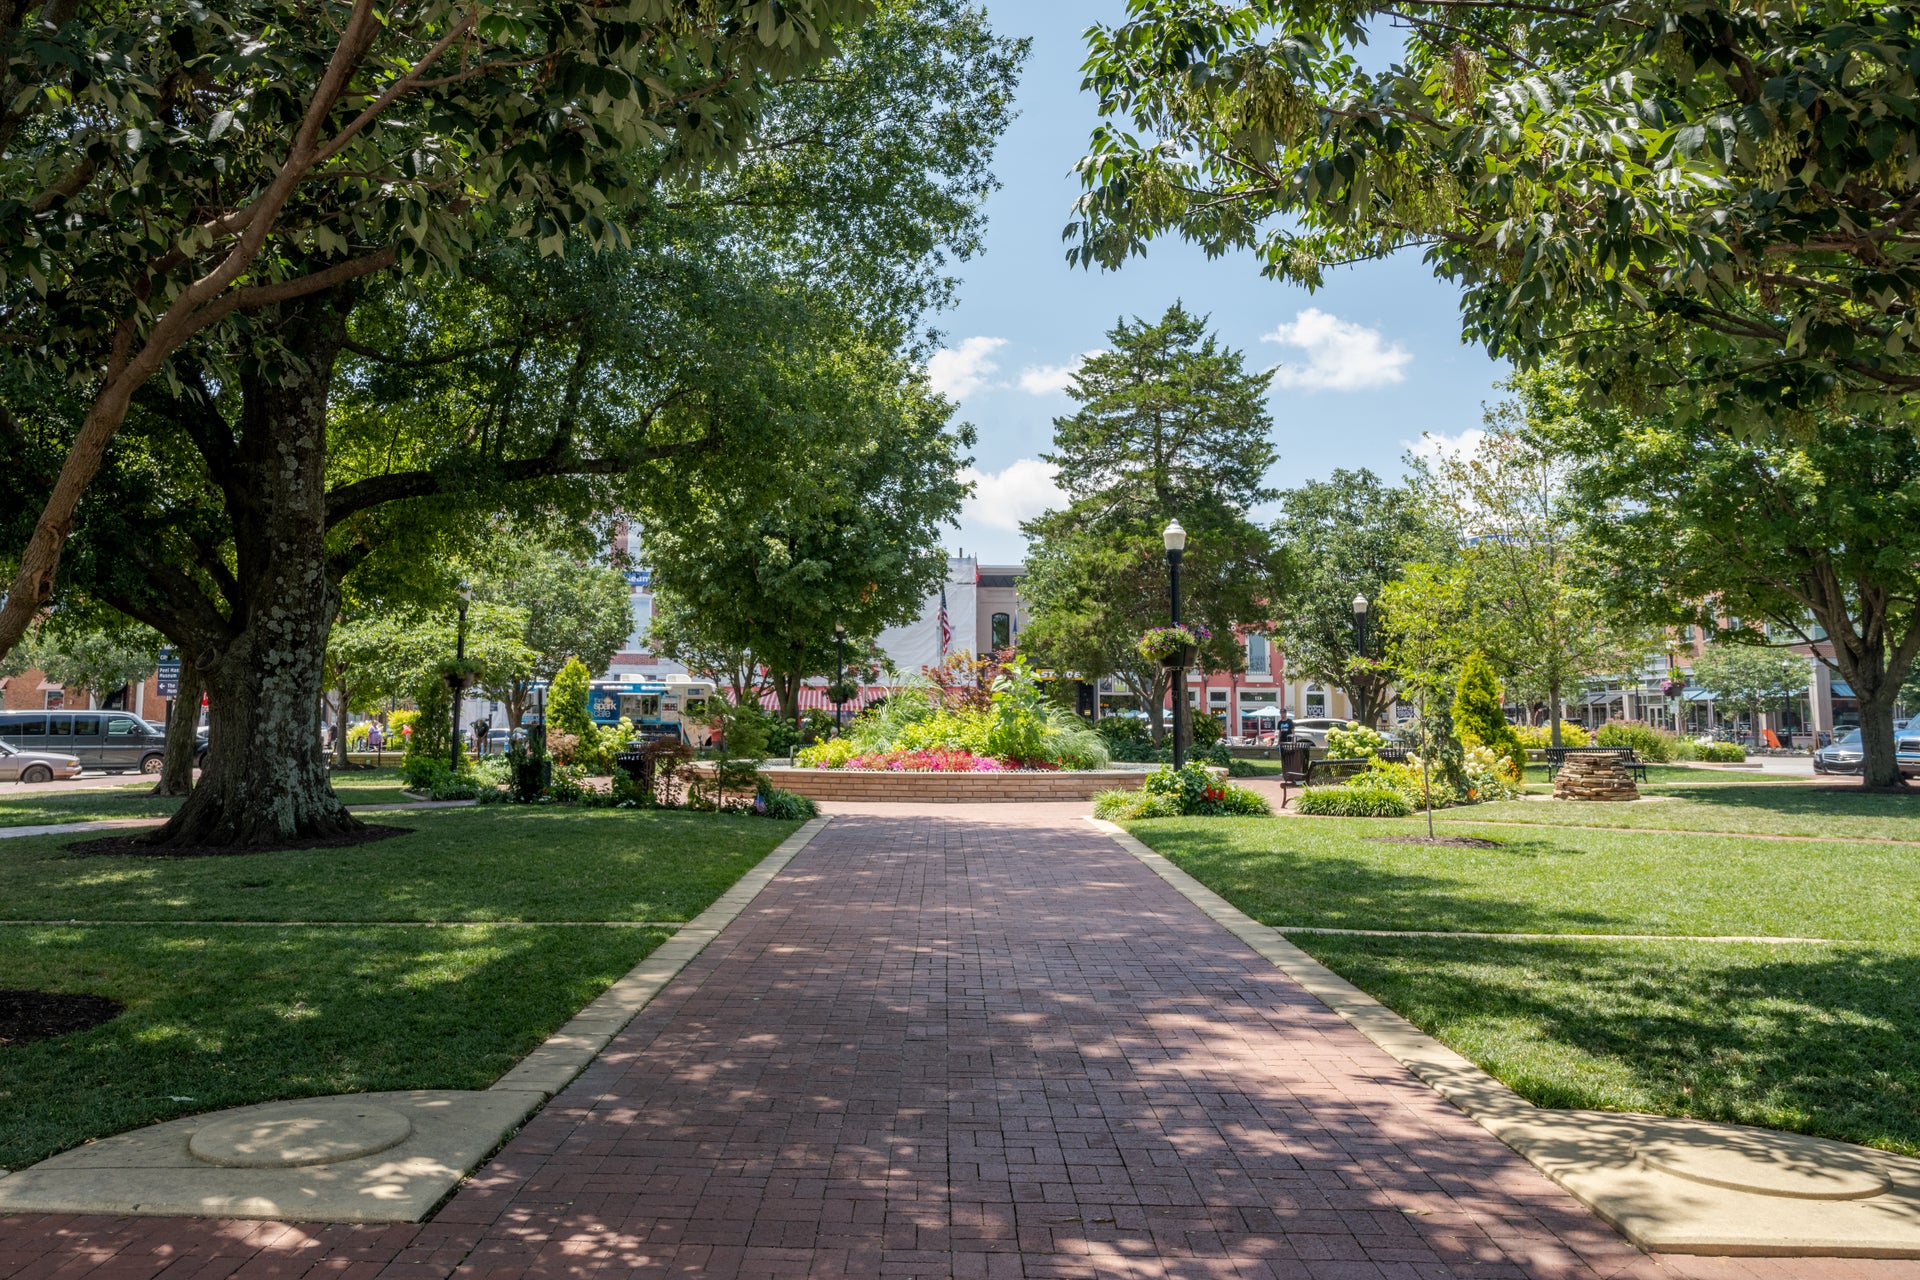 Pathway to the center part of the Bentonville, AR square with a garden in the middle